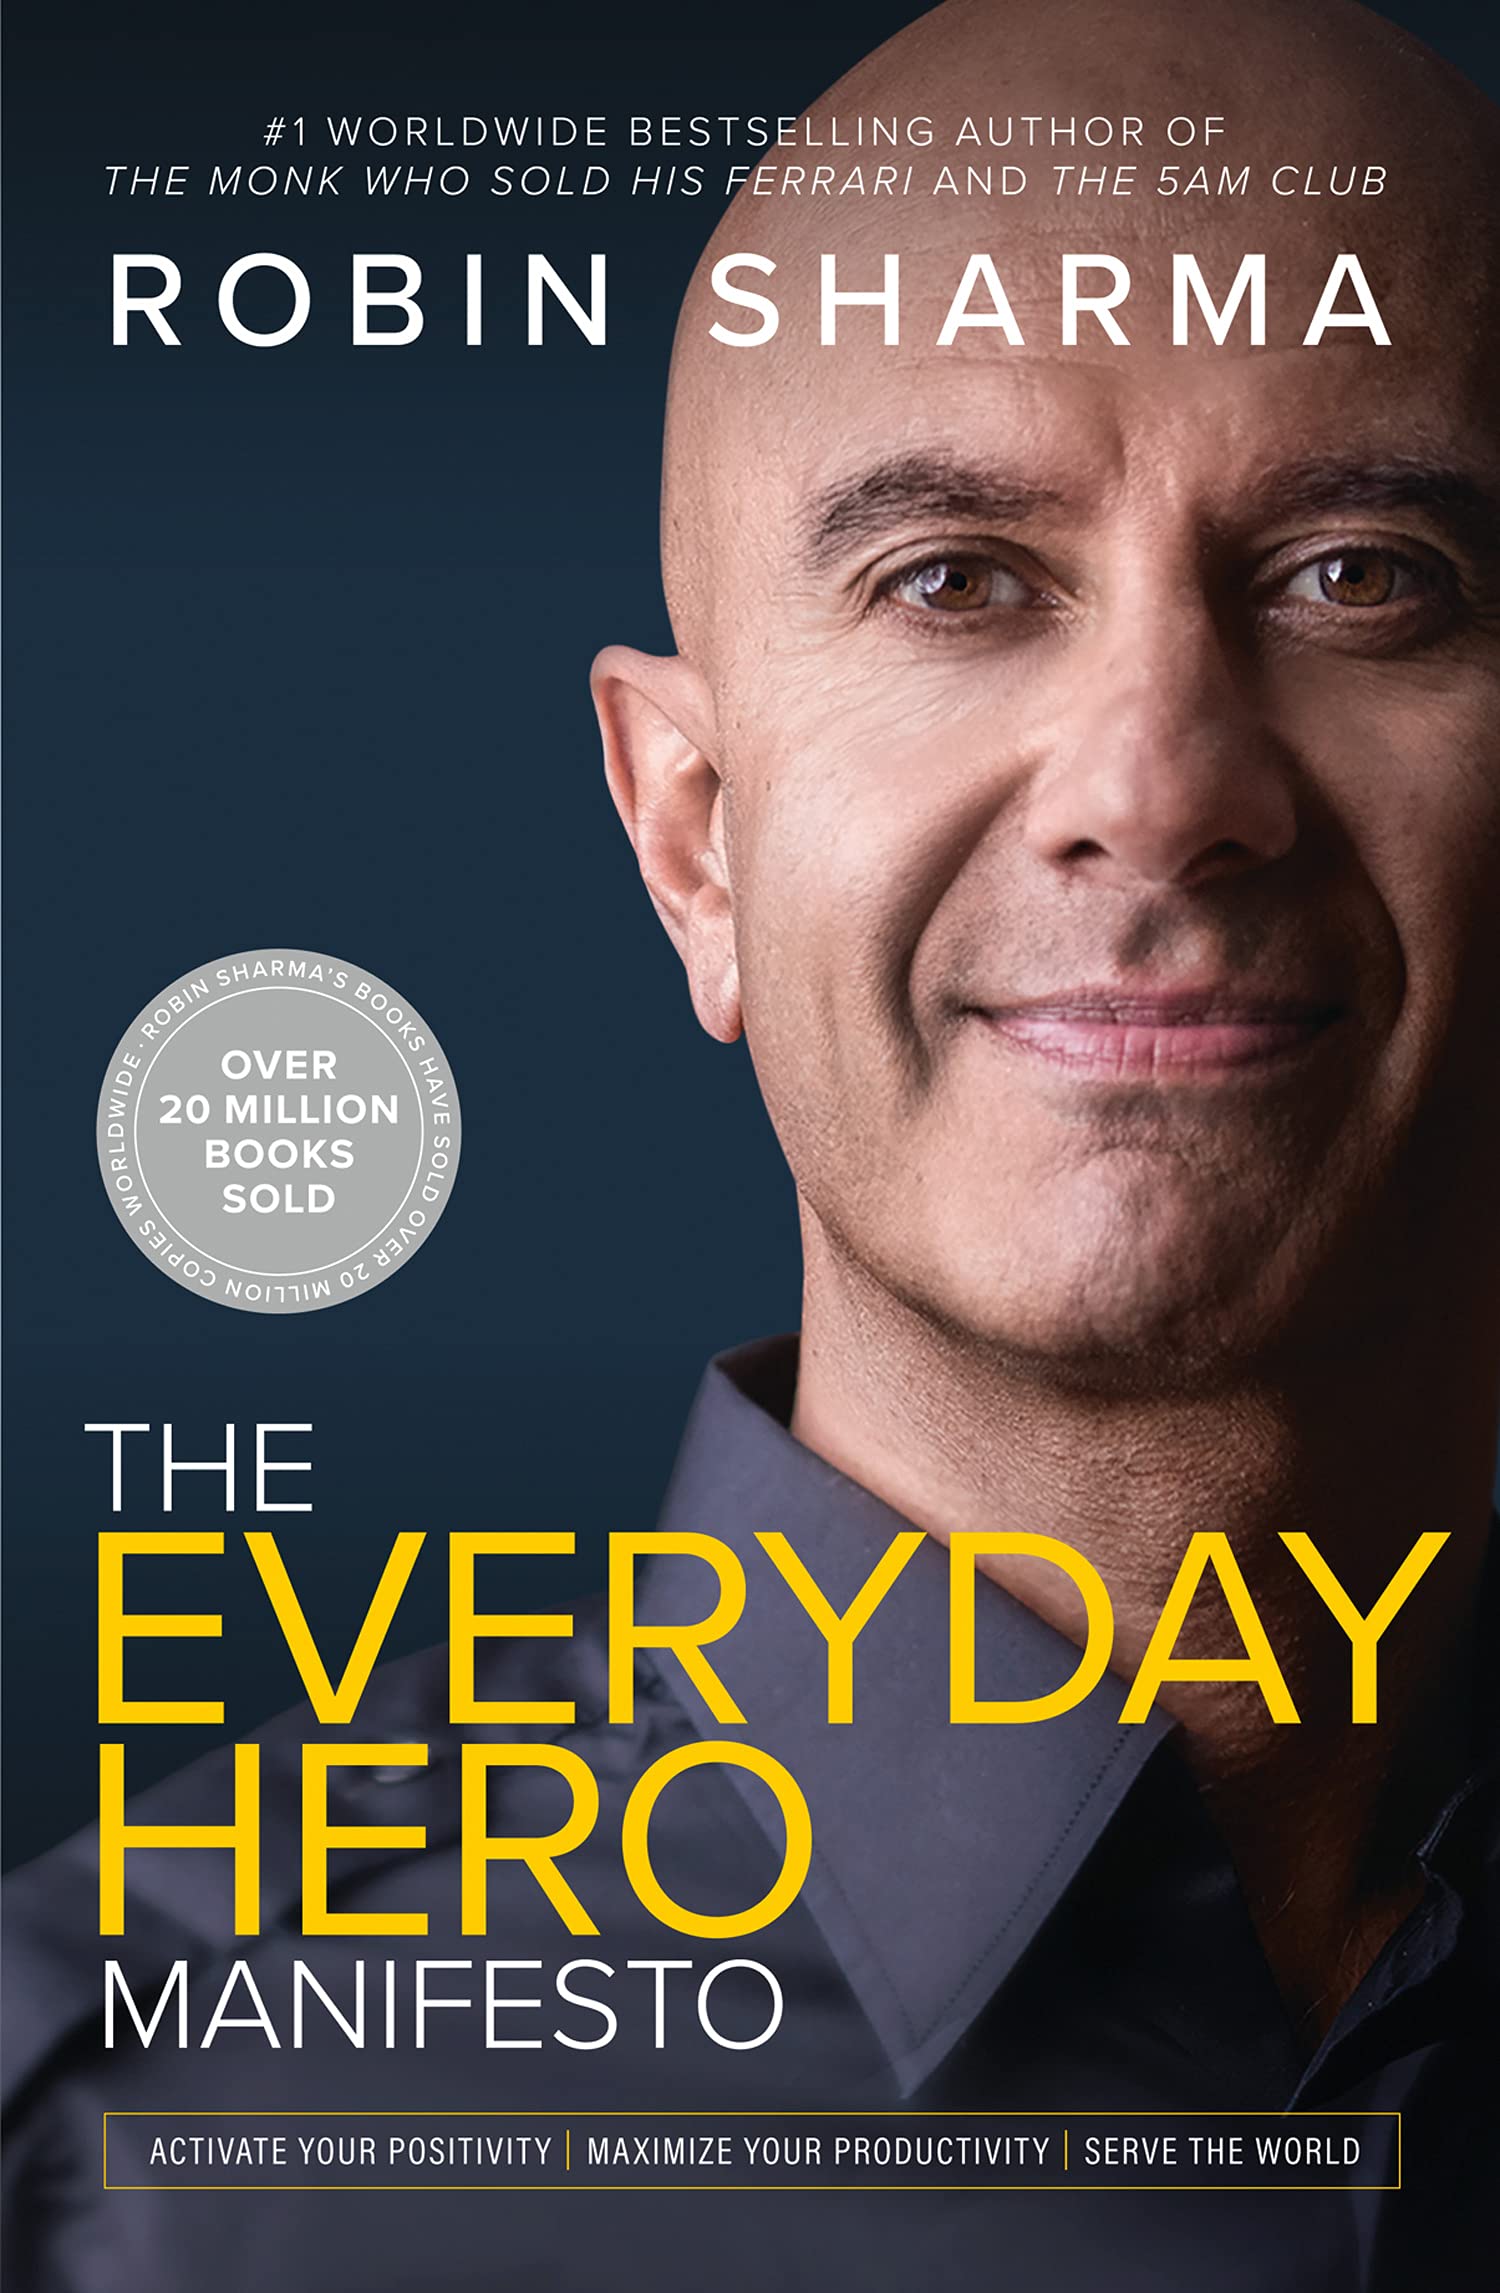 THE EVERYDAY HERO MANIFESTO: ACTIVATE YOUR POSITIVITY MAXIMIZE YOUR PRODUCTIVITY SERVE THE WORLD